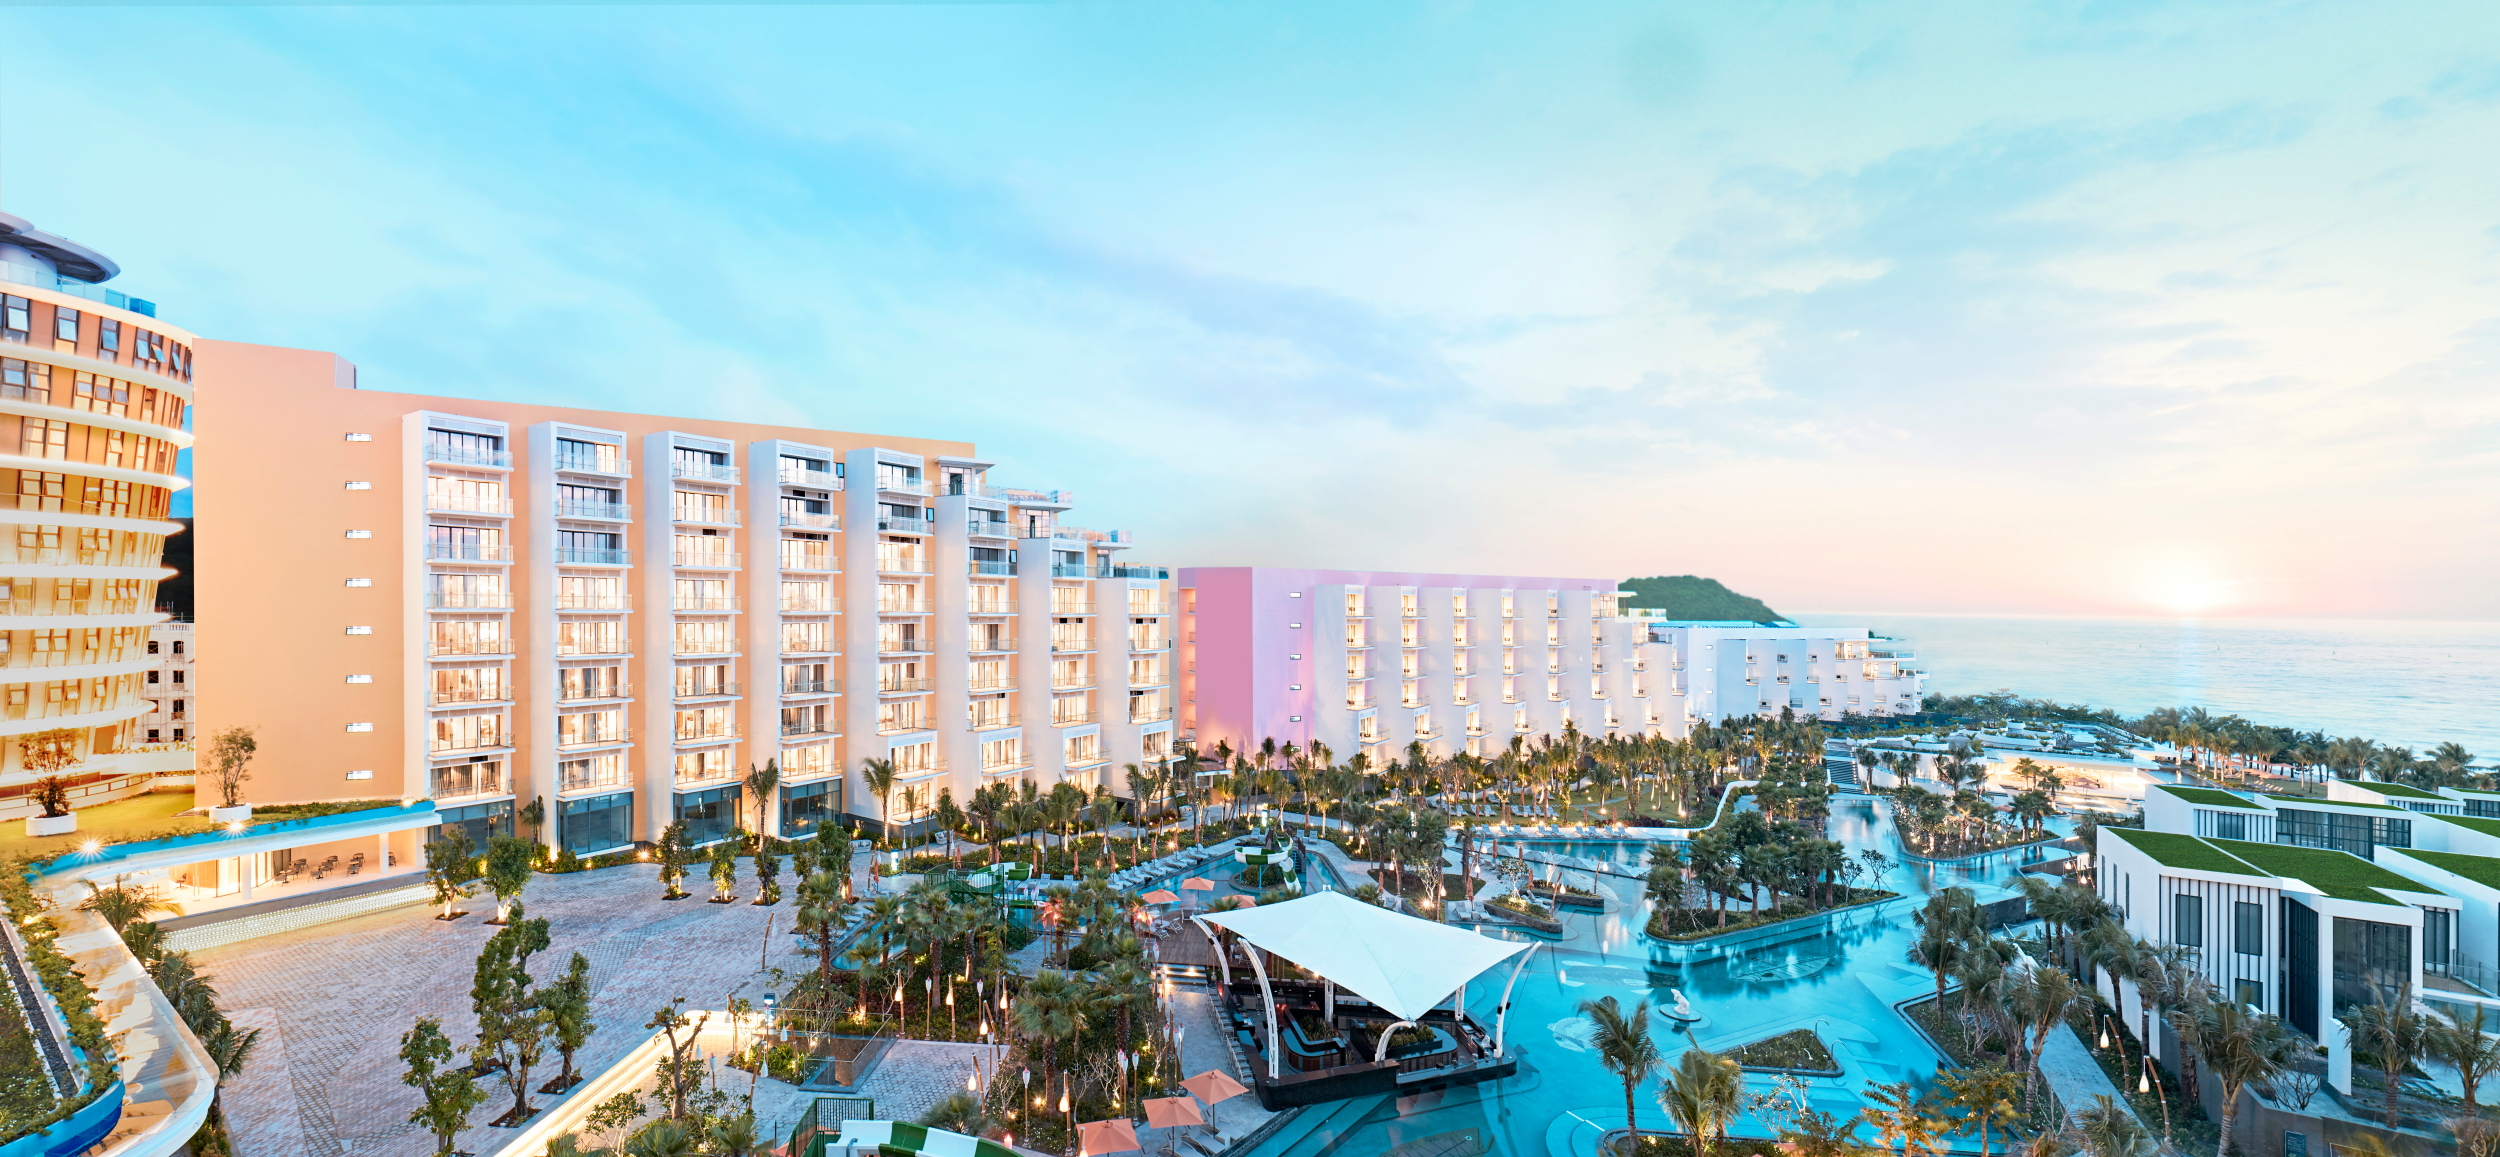 AccorHotels has expanded its already impressive portfolio of properties in Vietnam with the Premier Residences Emerald Bay in Phu Quoc. The resort features 745 rooms, suites and two-bedroom penthouses with a private pool that offers expansive views of Emerald Bay. Click to enlarge.